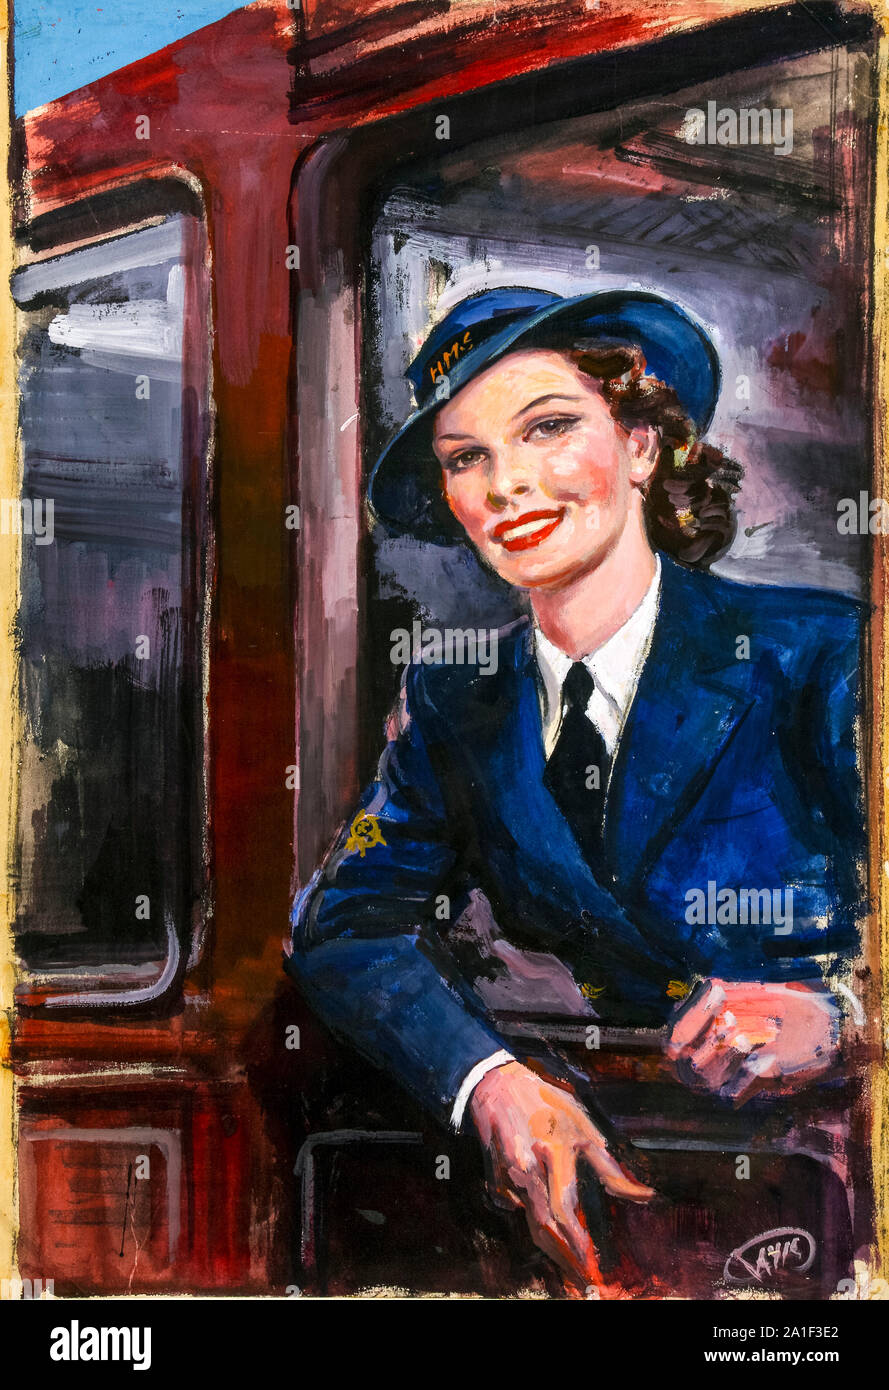 British, WW2, Forces Recruitment poster, W.R.N.S. rating (Wren), at railway carriage window, 1939-1946 Stock Photo